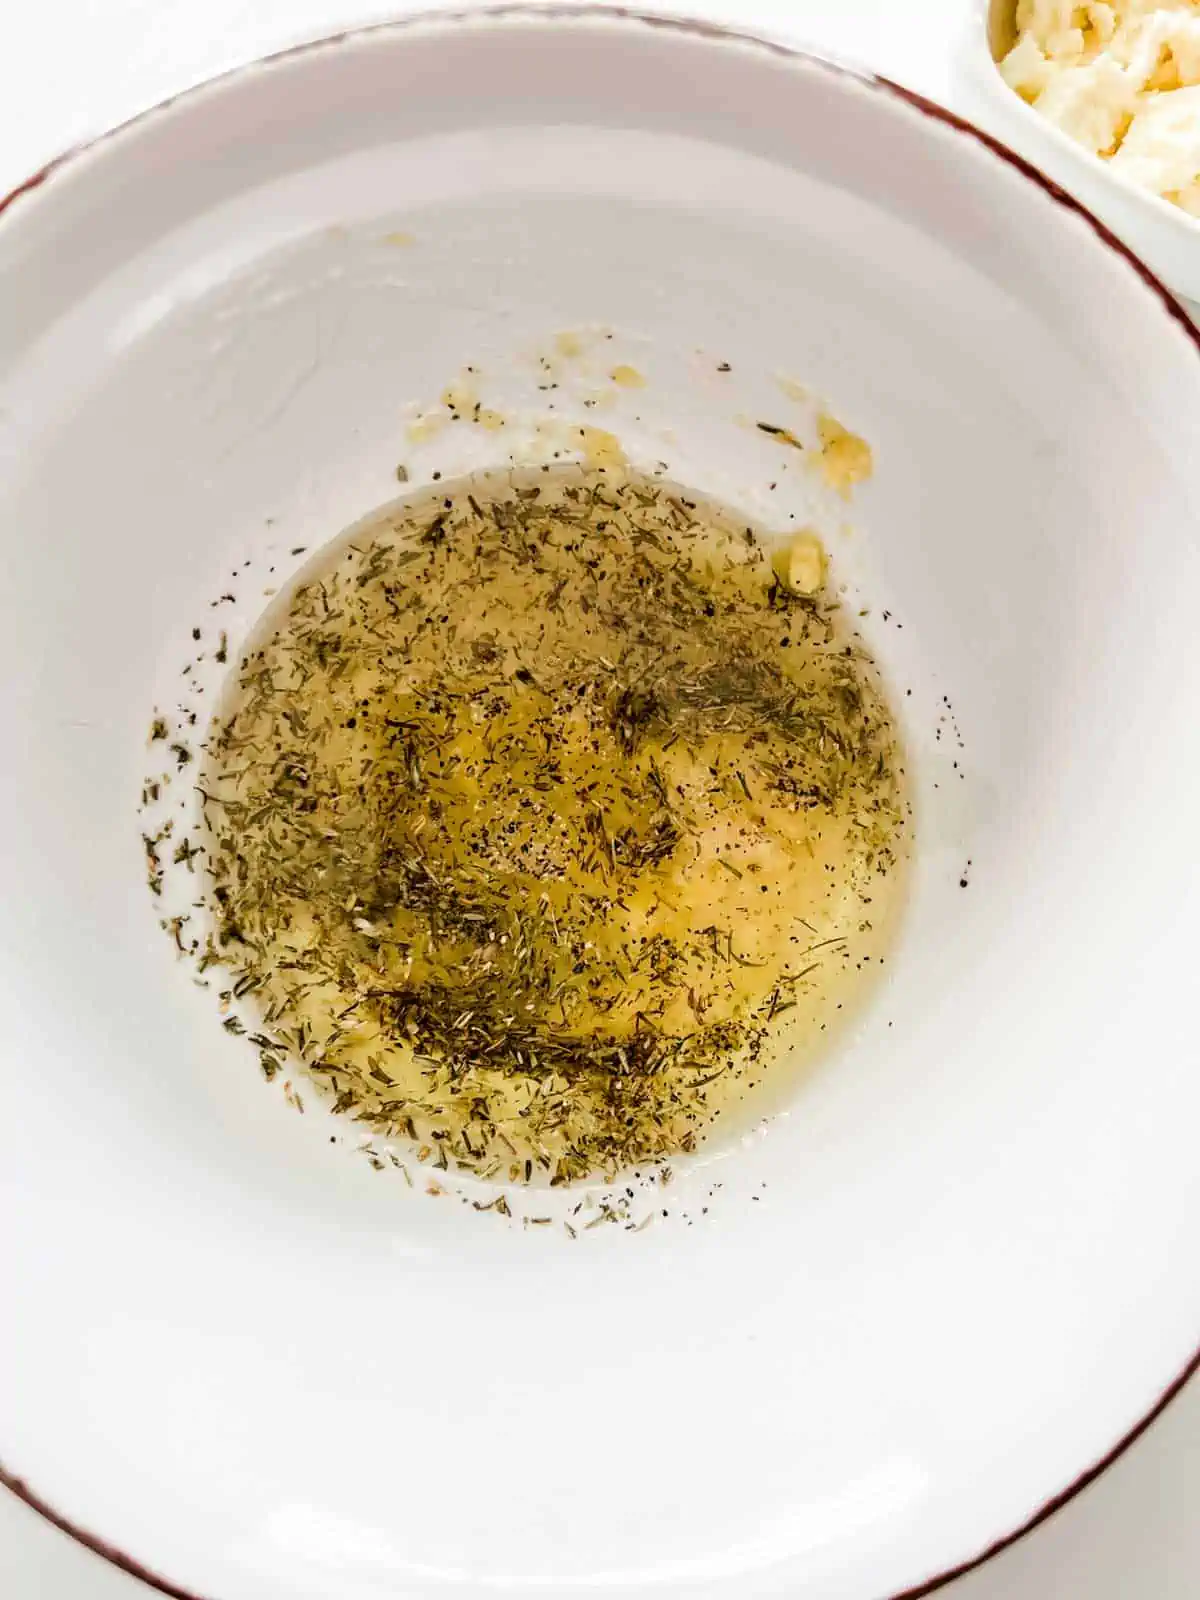 Photo of oil, garlic and seasonings in a small bowl.